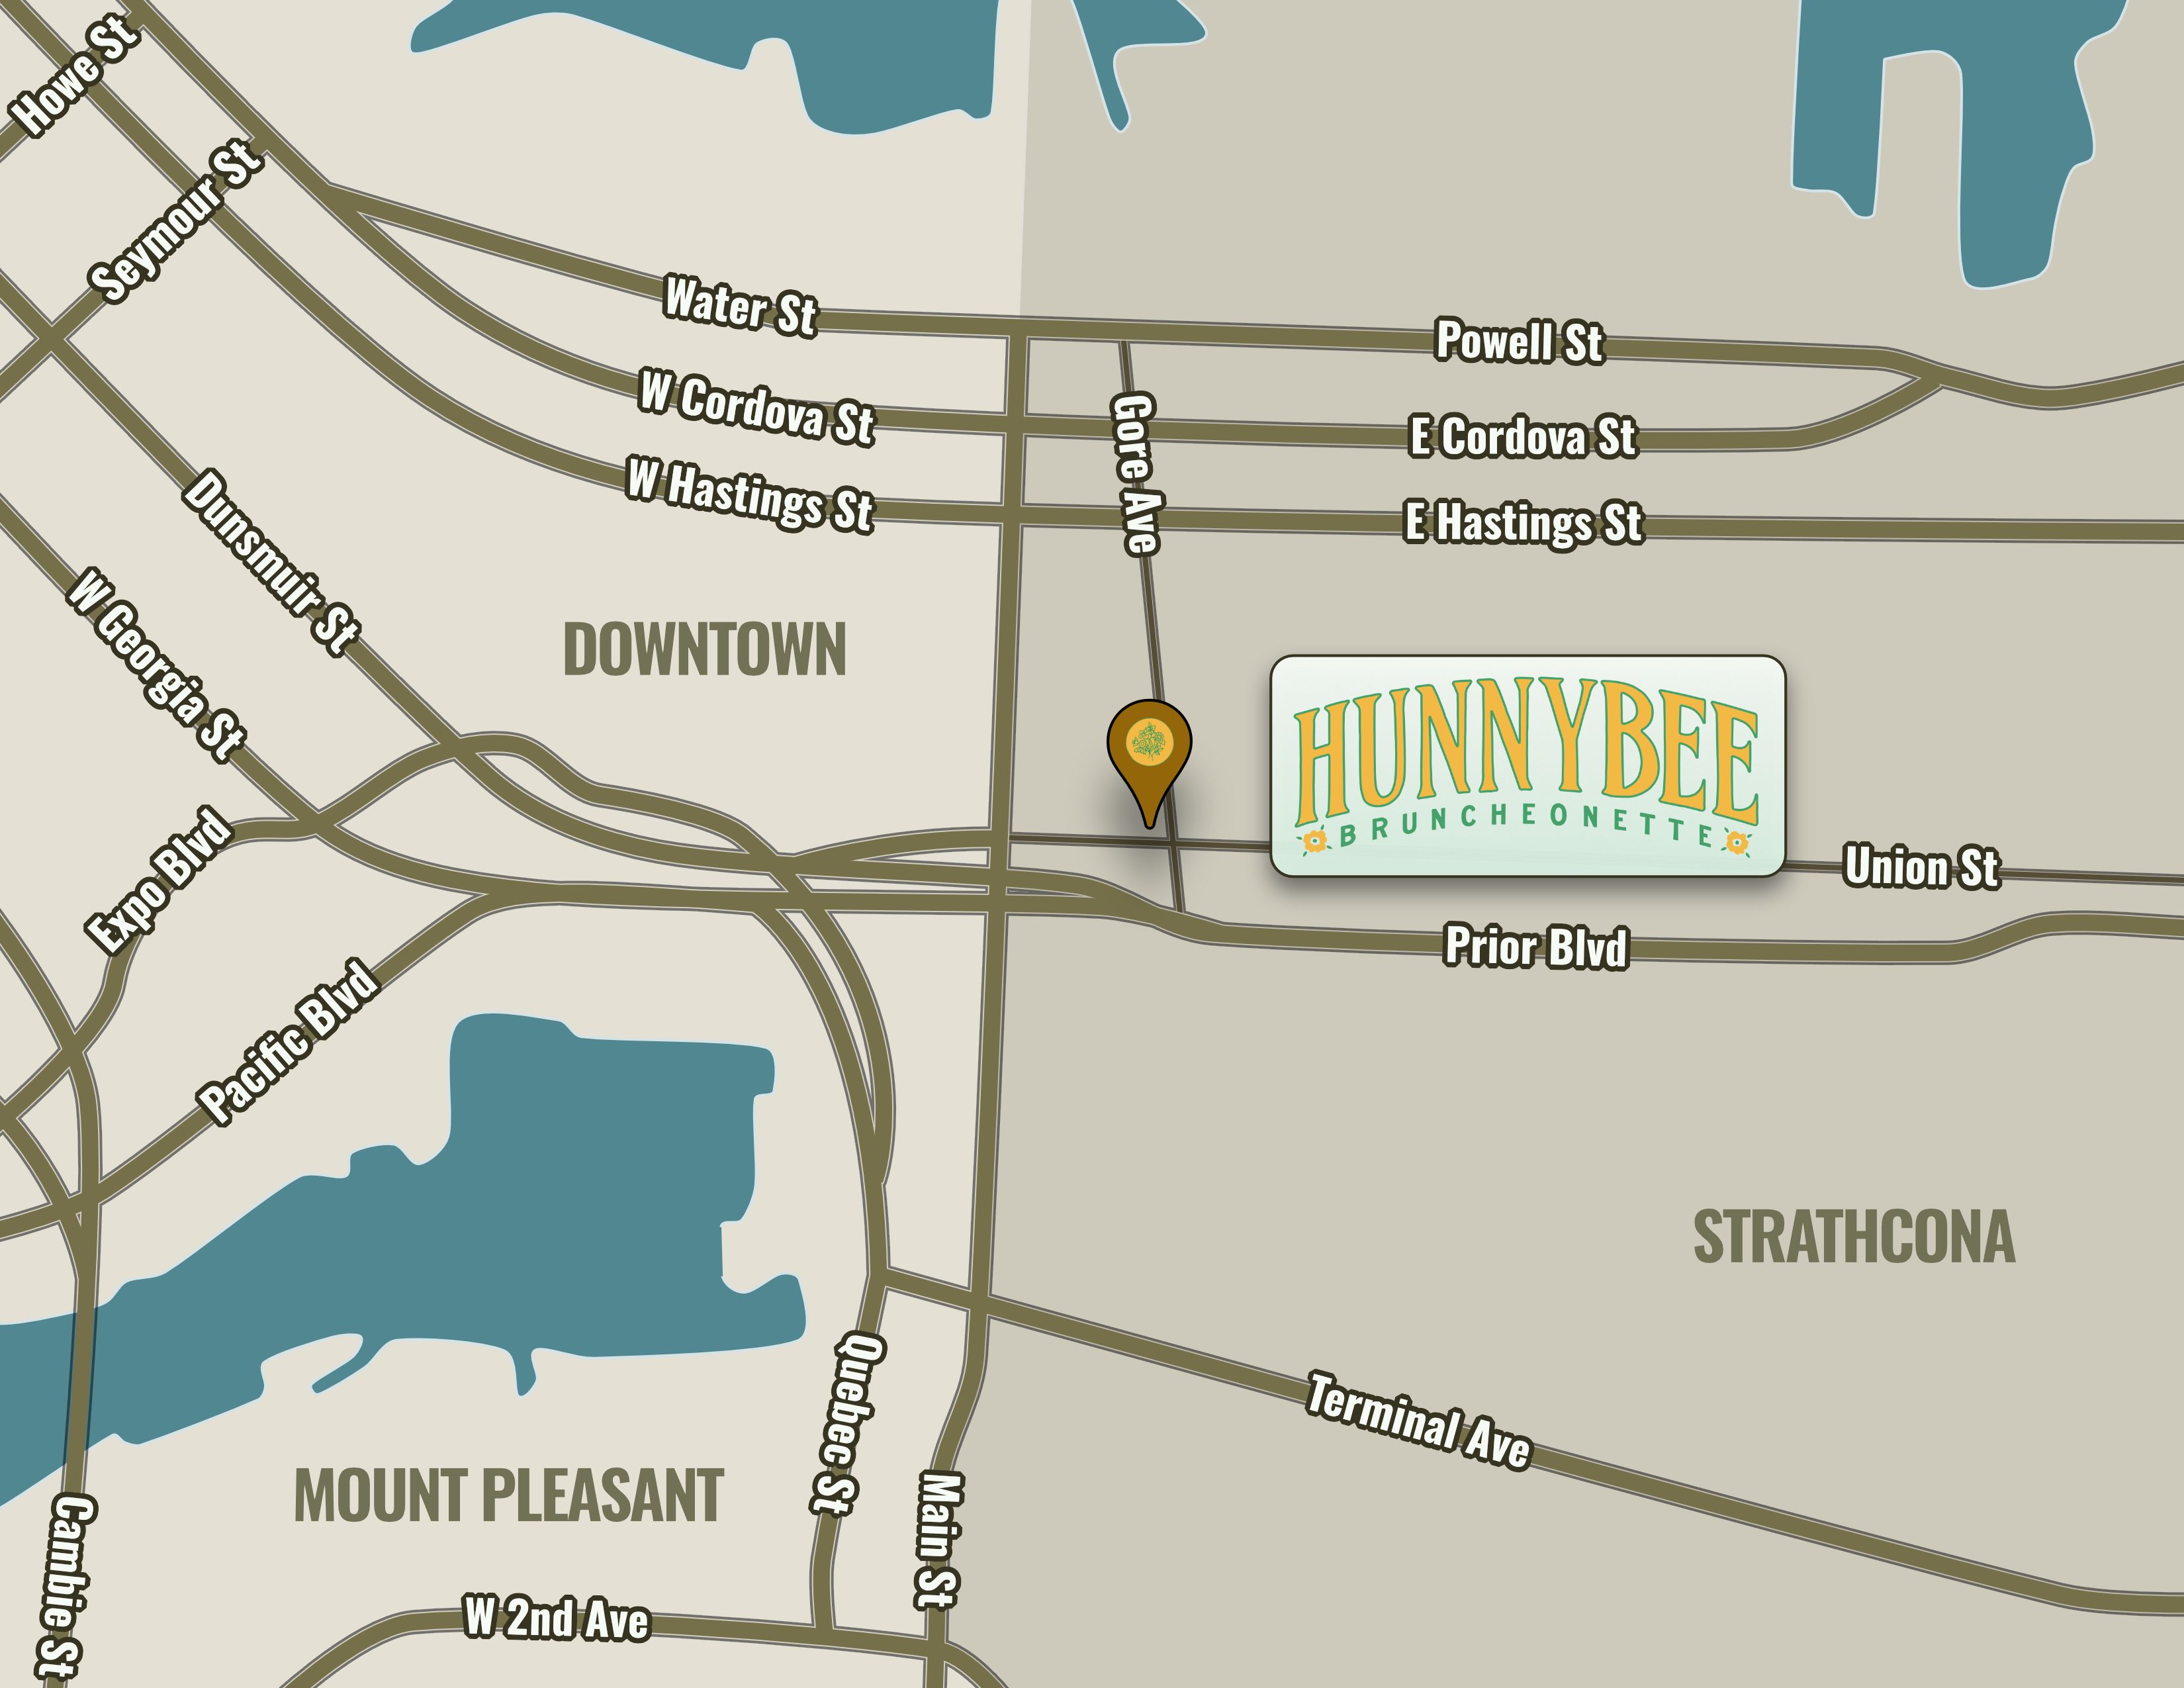 Hunnybee's address is 789 Gore Avenue. It's located in the Strathcona neighbourhood of Vancouver on the corner of Gore Avenue and Union Street. It's on the West side of Gore Avenue and the North side of Union Street.